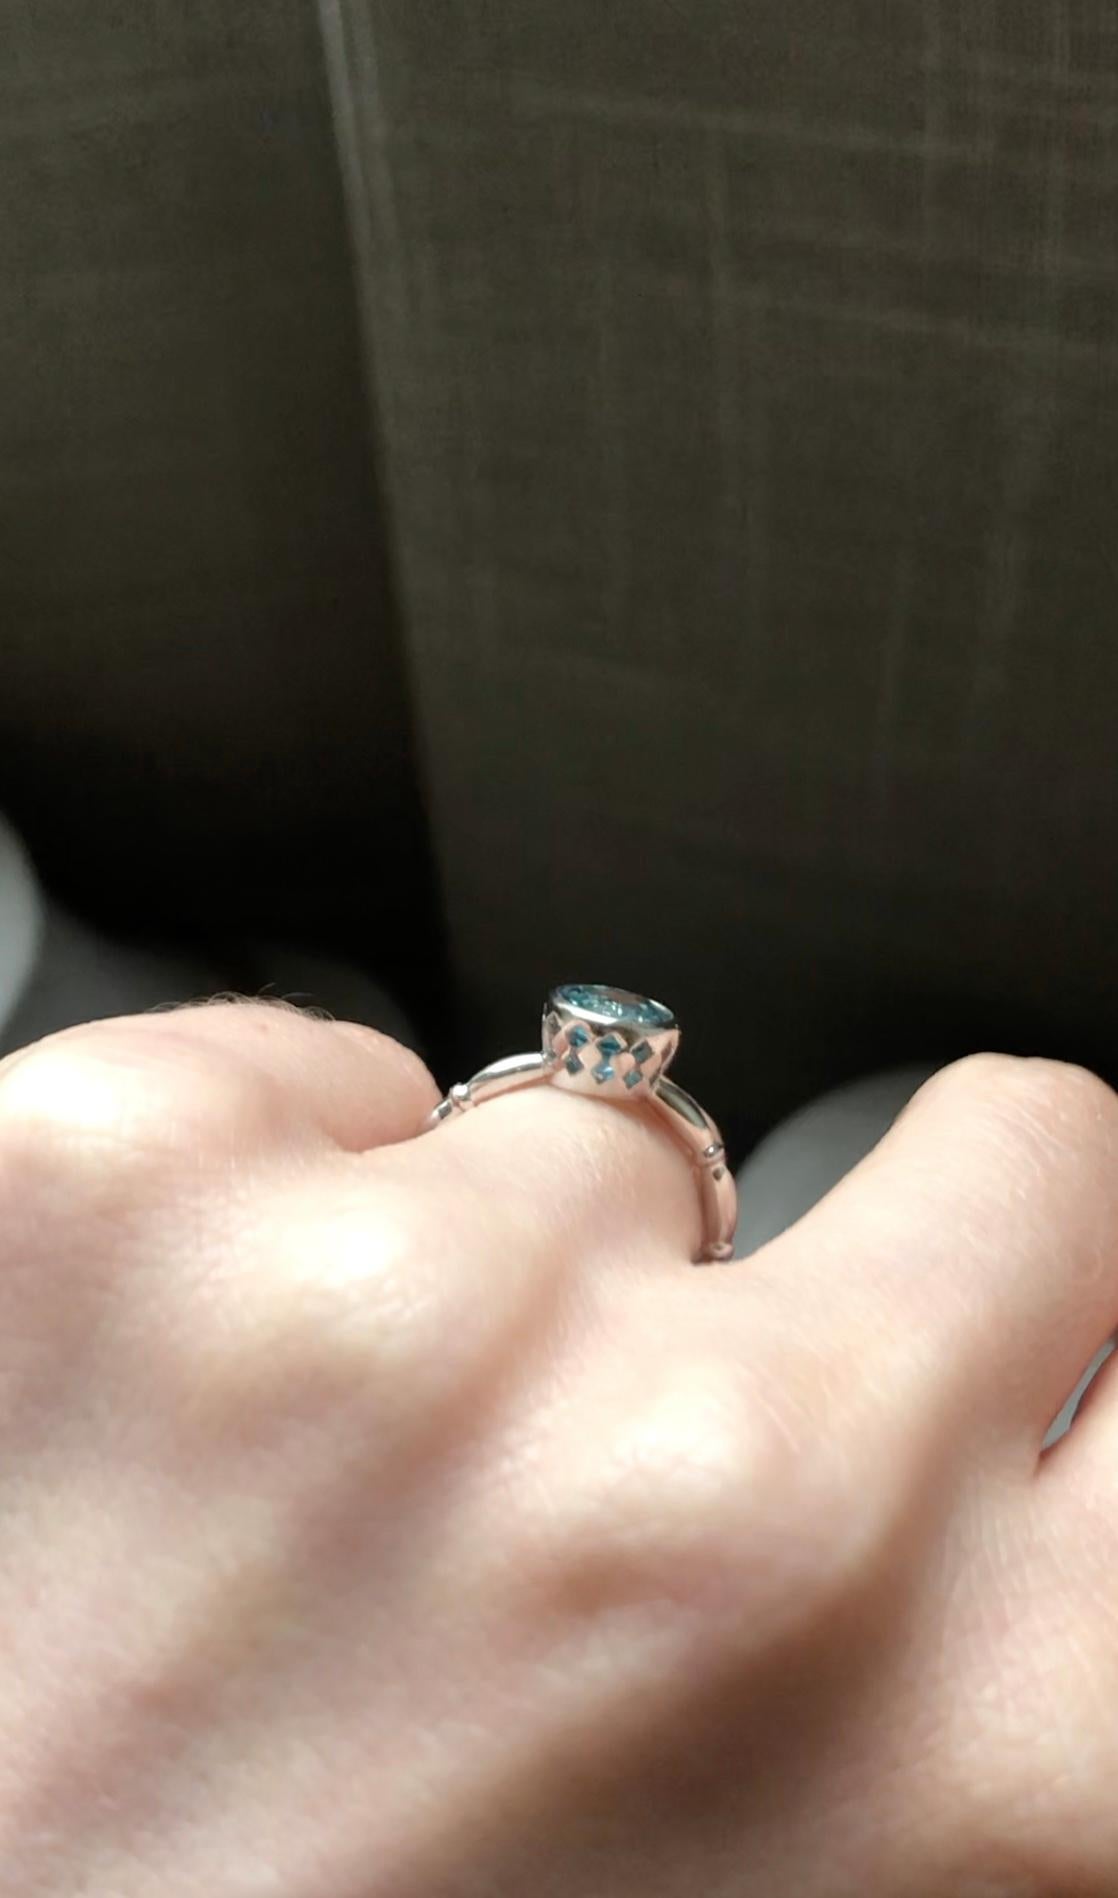 For Sale:  14k White Gold Solitaire Engagement Ring with 2.16 Carat Round Blue Zircon 7